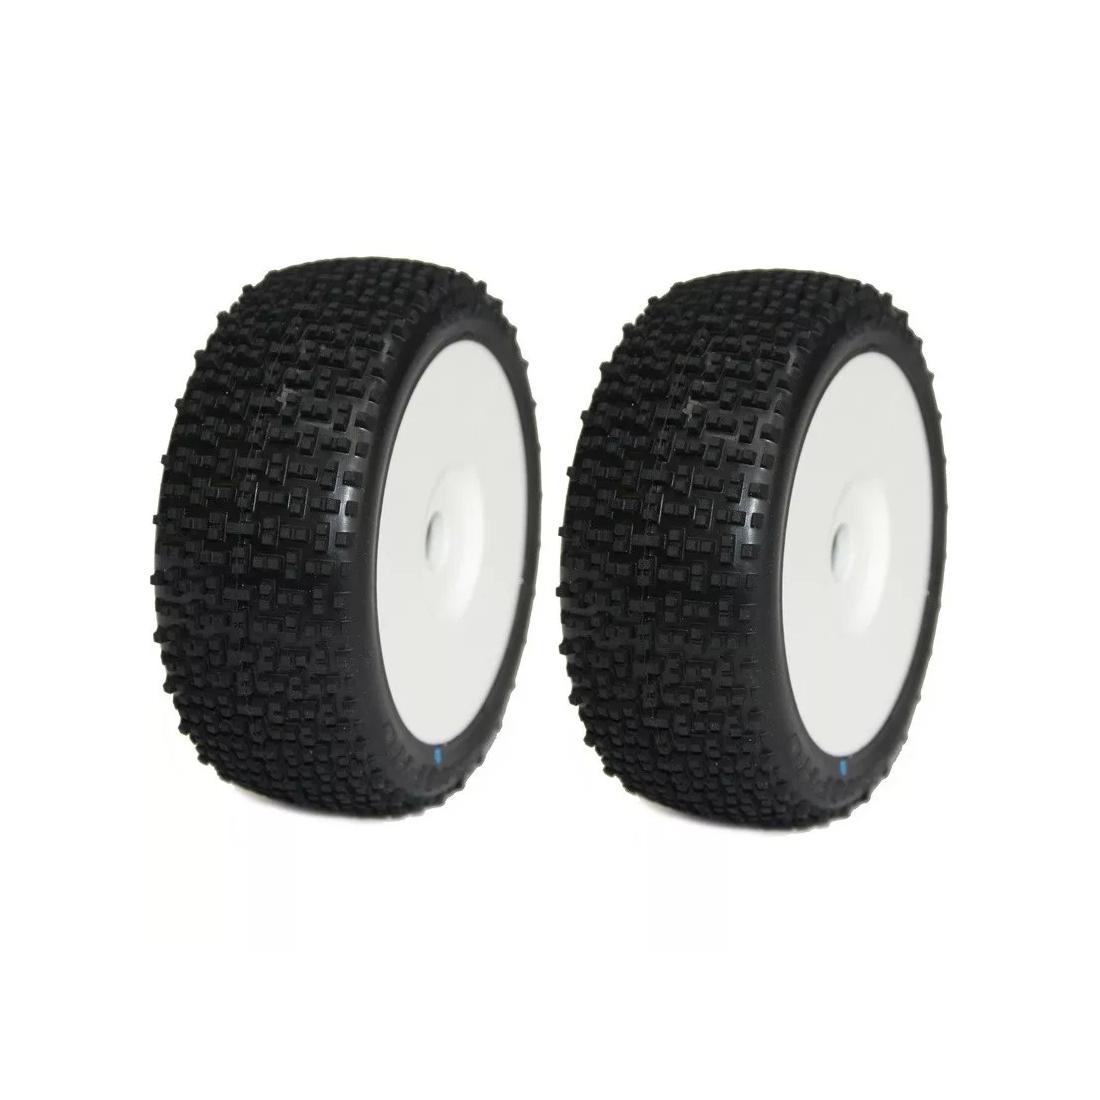 Tyre set pre-mounted Gravity RC M4 Super Soft , fits Buggy 1/8 17mm Hex Rims Medial Pro